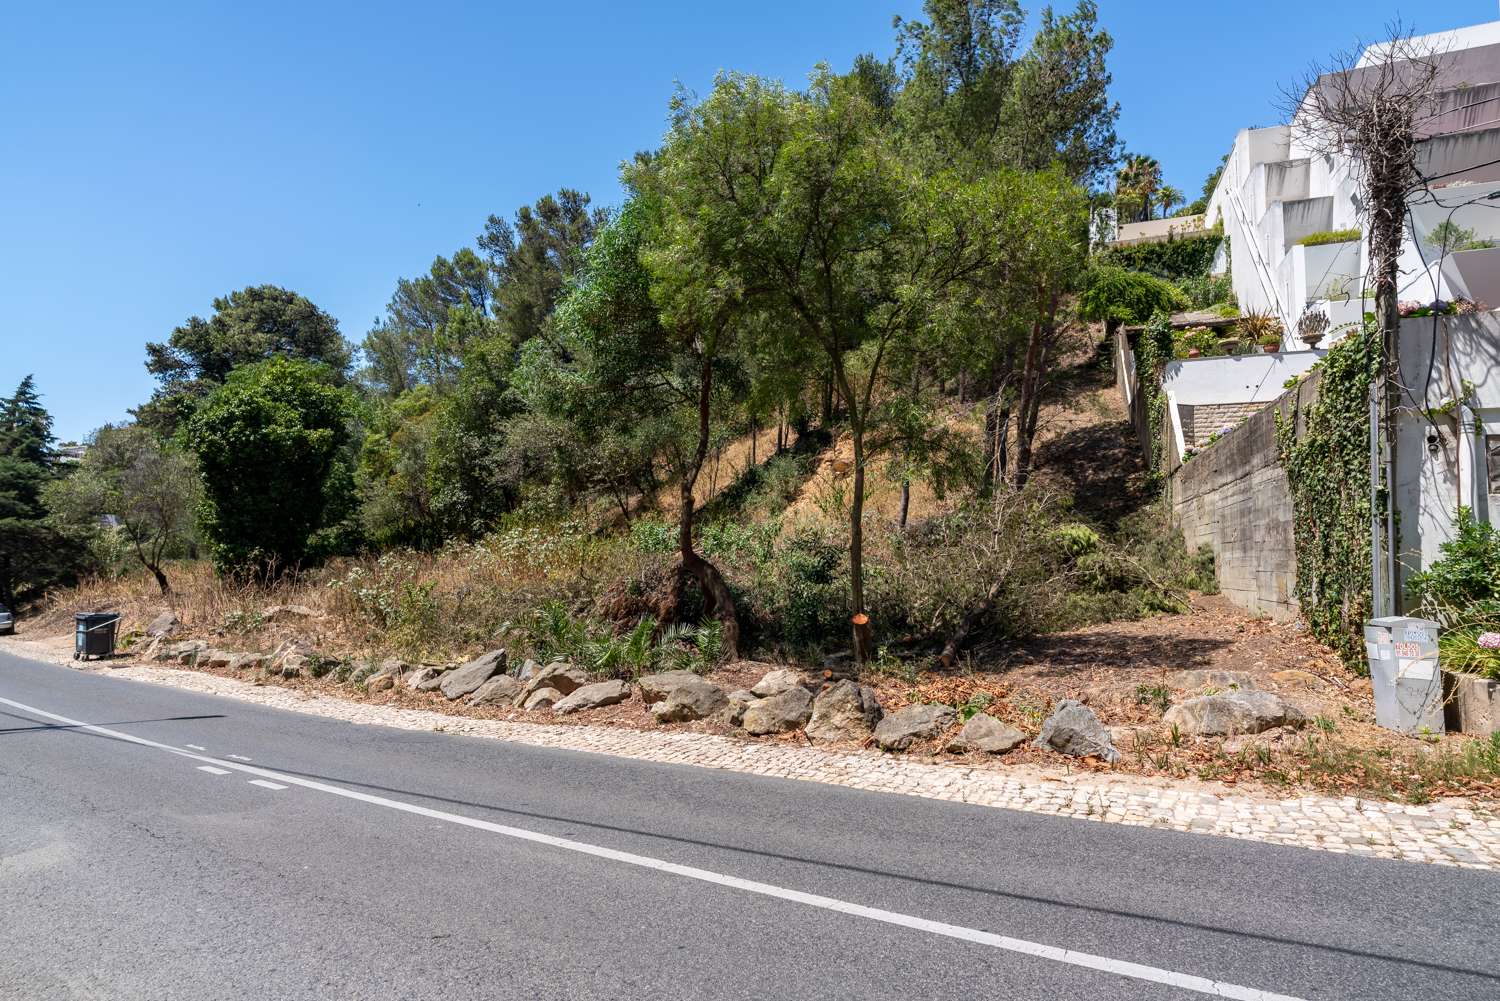 Land suitable for the construction of five houses in Estoril